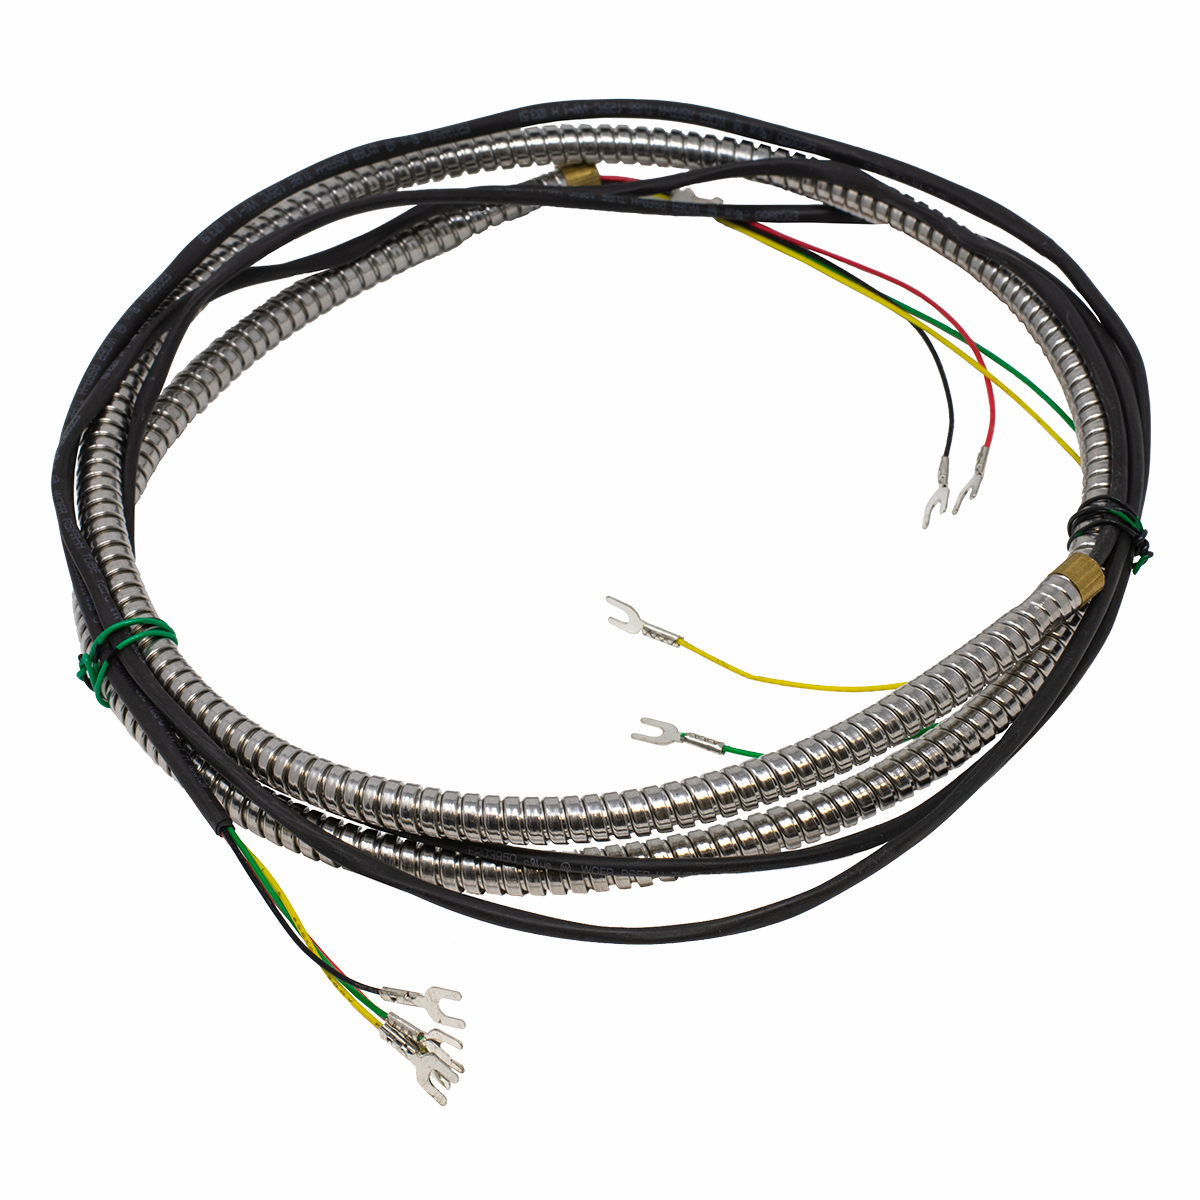 4' Armored Handset Cord with 5' Wires